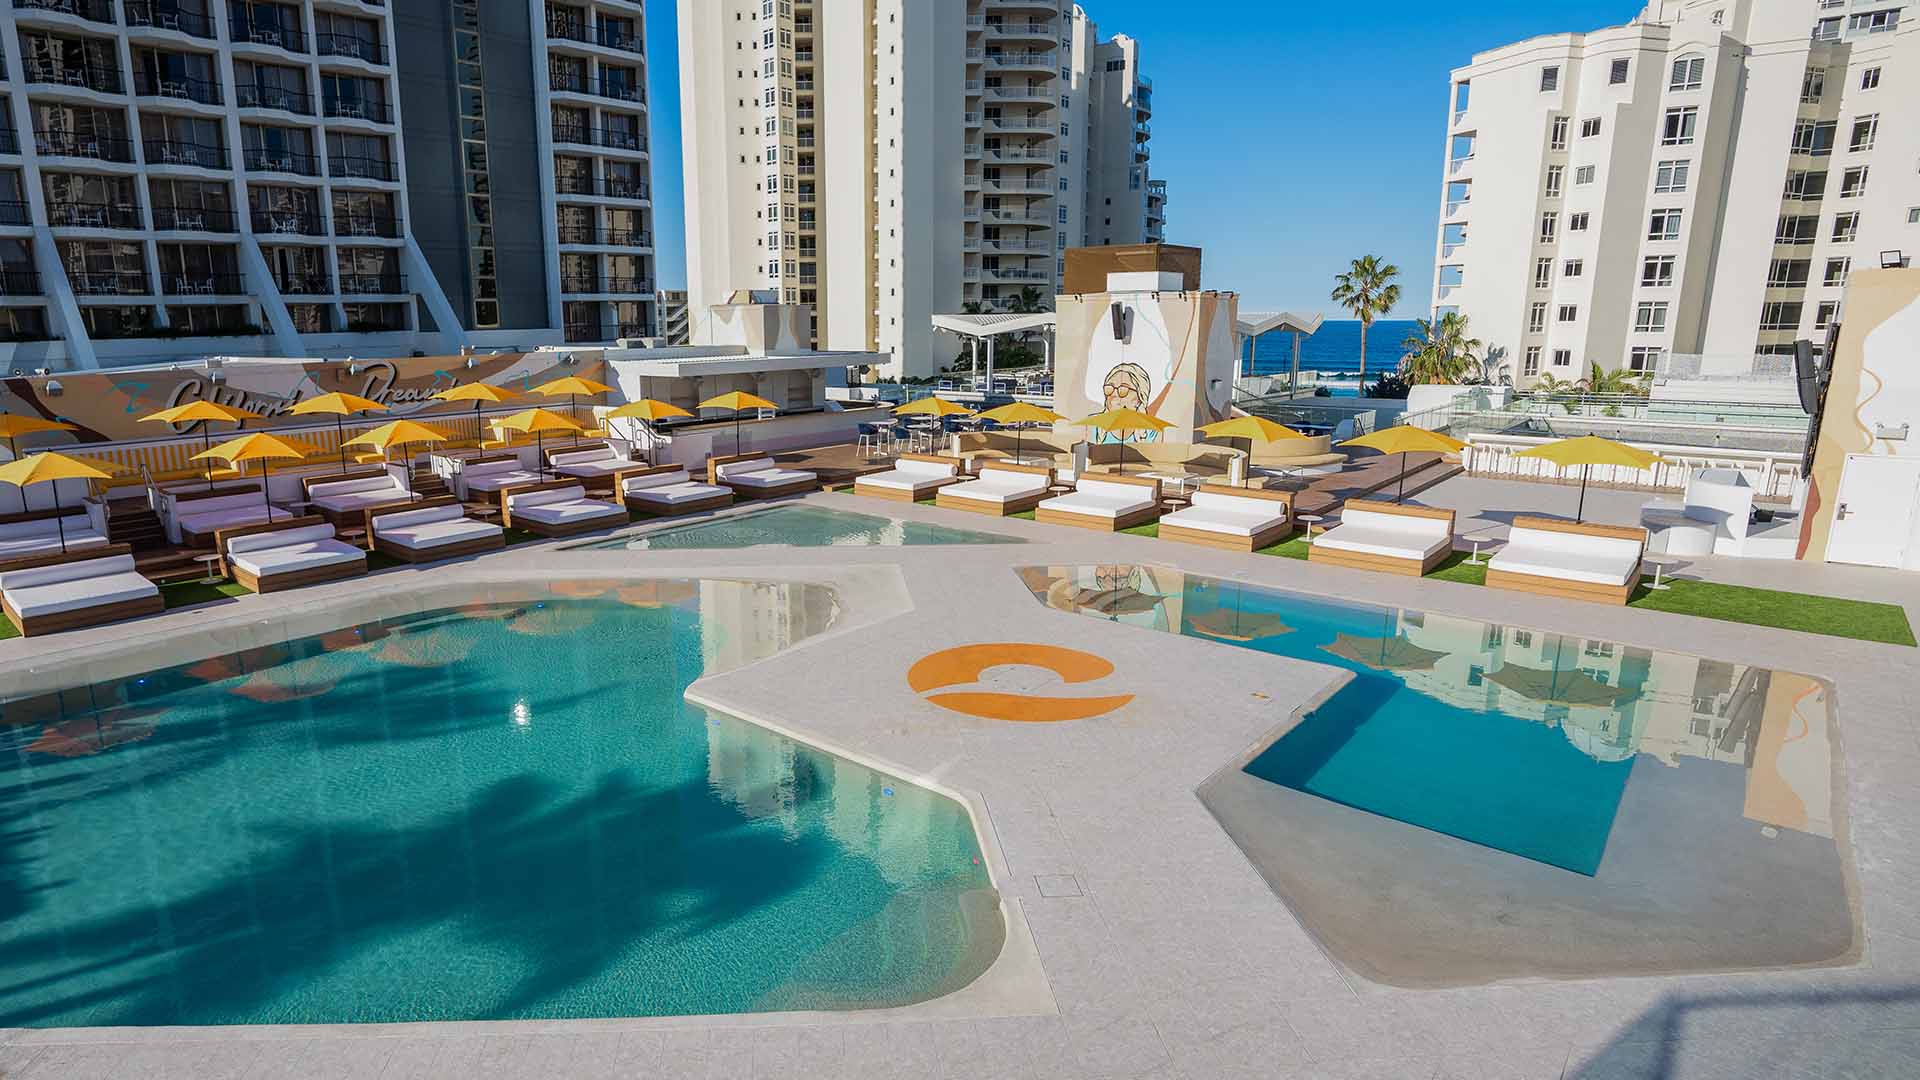 Cali Beach Club's Cabana-Filled Oceanside Precinct Is Opening on a Gold Coast Rooftop This Month